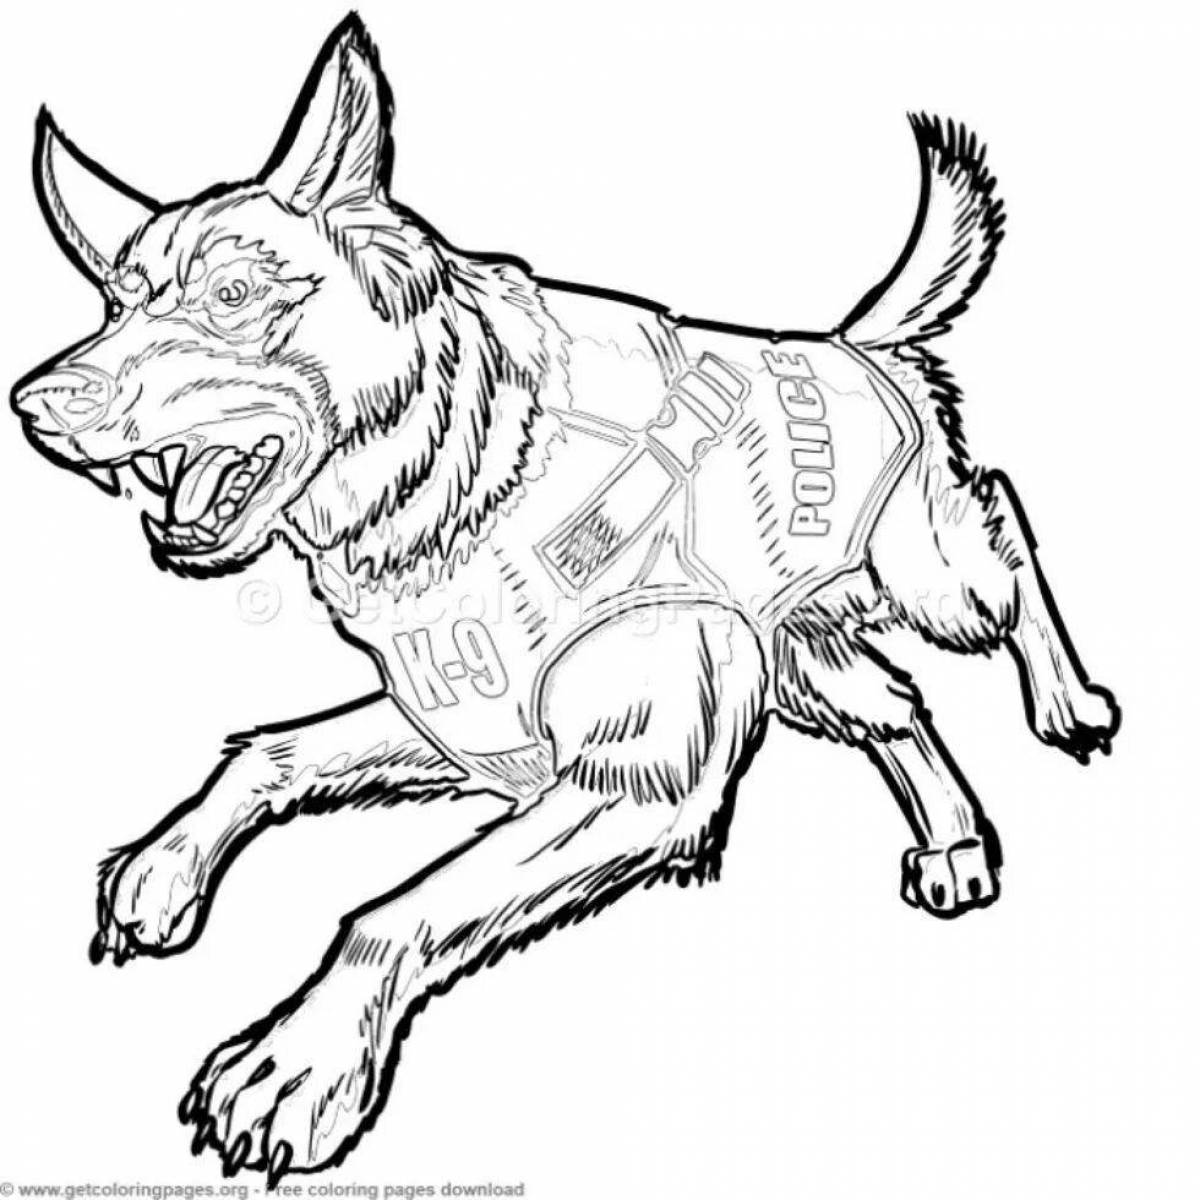 Coloring page dainty german shepherd puppy